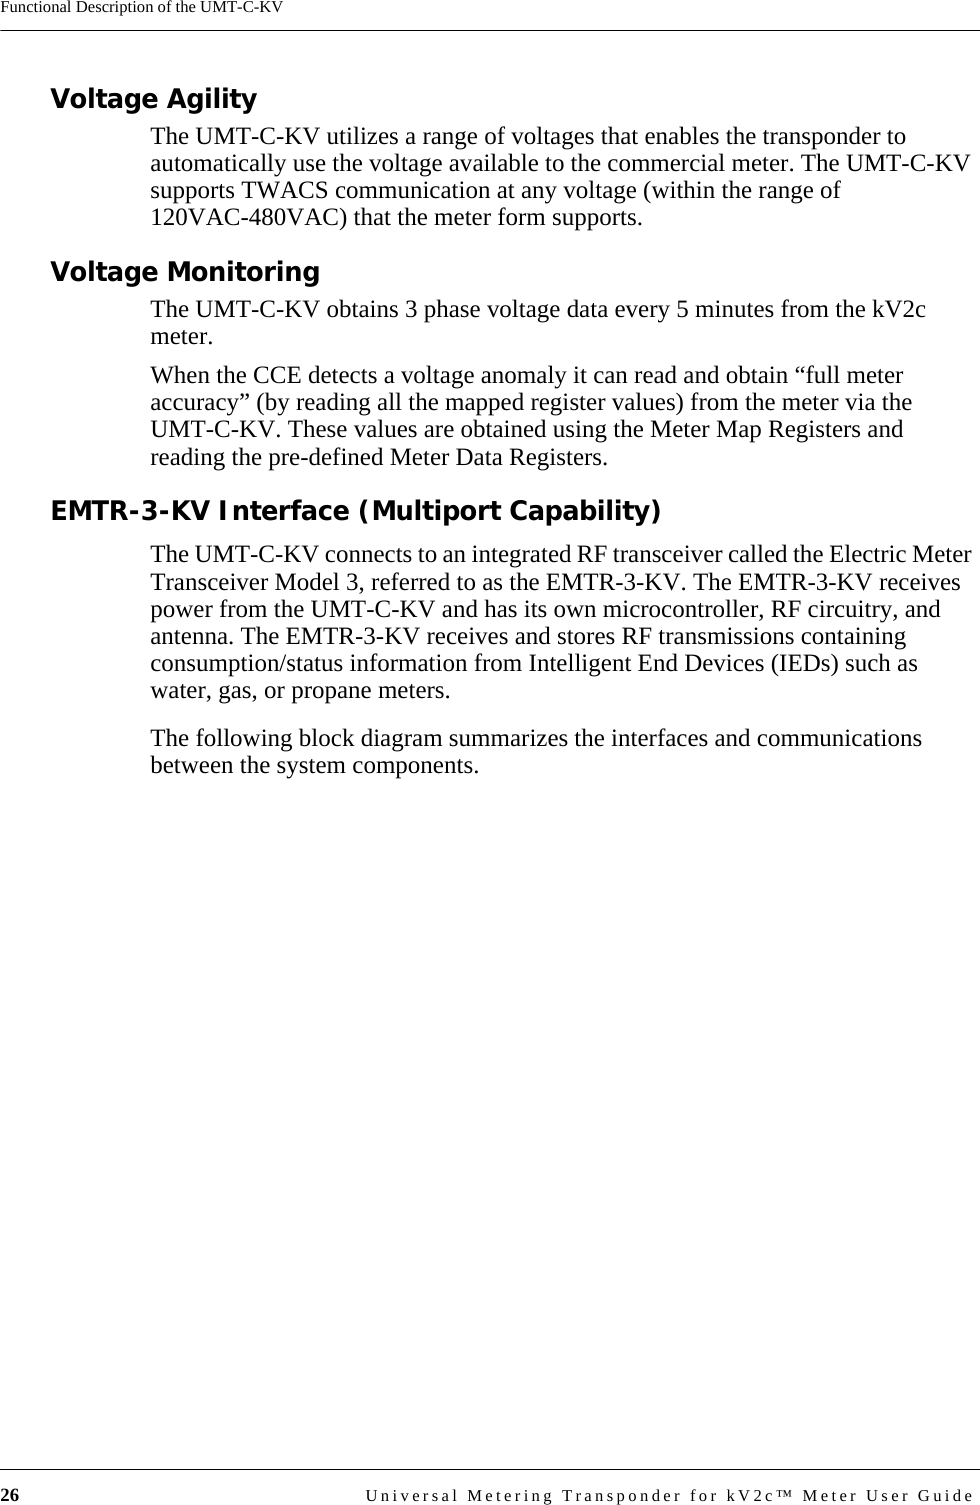 26 Universal Metering Transponder for kV2c™ Meter User GuideFunctional Description of the UMT-C-KVVoltage AgilityThe UMT-C-KV utilizes a range of voltages that enables the transponder to automatically use the voltage available to the commercial meter. The UMT-C-KV supports TWACS communication at any voltage (within the range of 120VAC-480VAC) that the meter form supports. Voltage Monitoring The UMT-C-KV obtains 3 phase voltage data every 5 minutes from the kV2c meter. When the CCE detects a voltage anomaly it can read and obtain “full meter accuracy” (by reading all the mapped register values) from the meter via the UMT-C-KV. These values are obtained using the Meter Map Registers and reading the pre-defined Meter Data Registers.EMTR-3-KV Interface (Multiport Capability)The UMT-C-KV connects to an integrated RF transceiver called the Electric Meter Transceiver Model 3, referred to as the EMTR-3-KV. The EMTR-3-KV receives power from the UMT-C-KV and has its own microcontroller, RF circuitry, and antenna. The EMTR-3-KV receives and stores RF transmissions containing consumption/status information from Intelligent End Devices (IEDs) such as water, gas, or propane meters. The following block diagram summarizes the interfaces and communications between the system components.